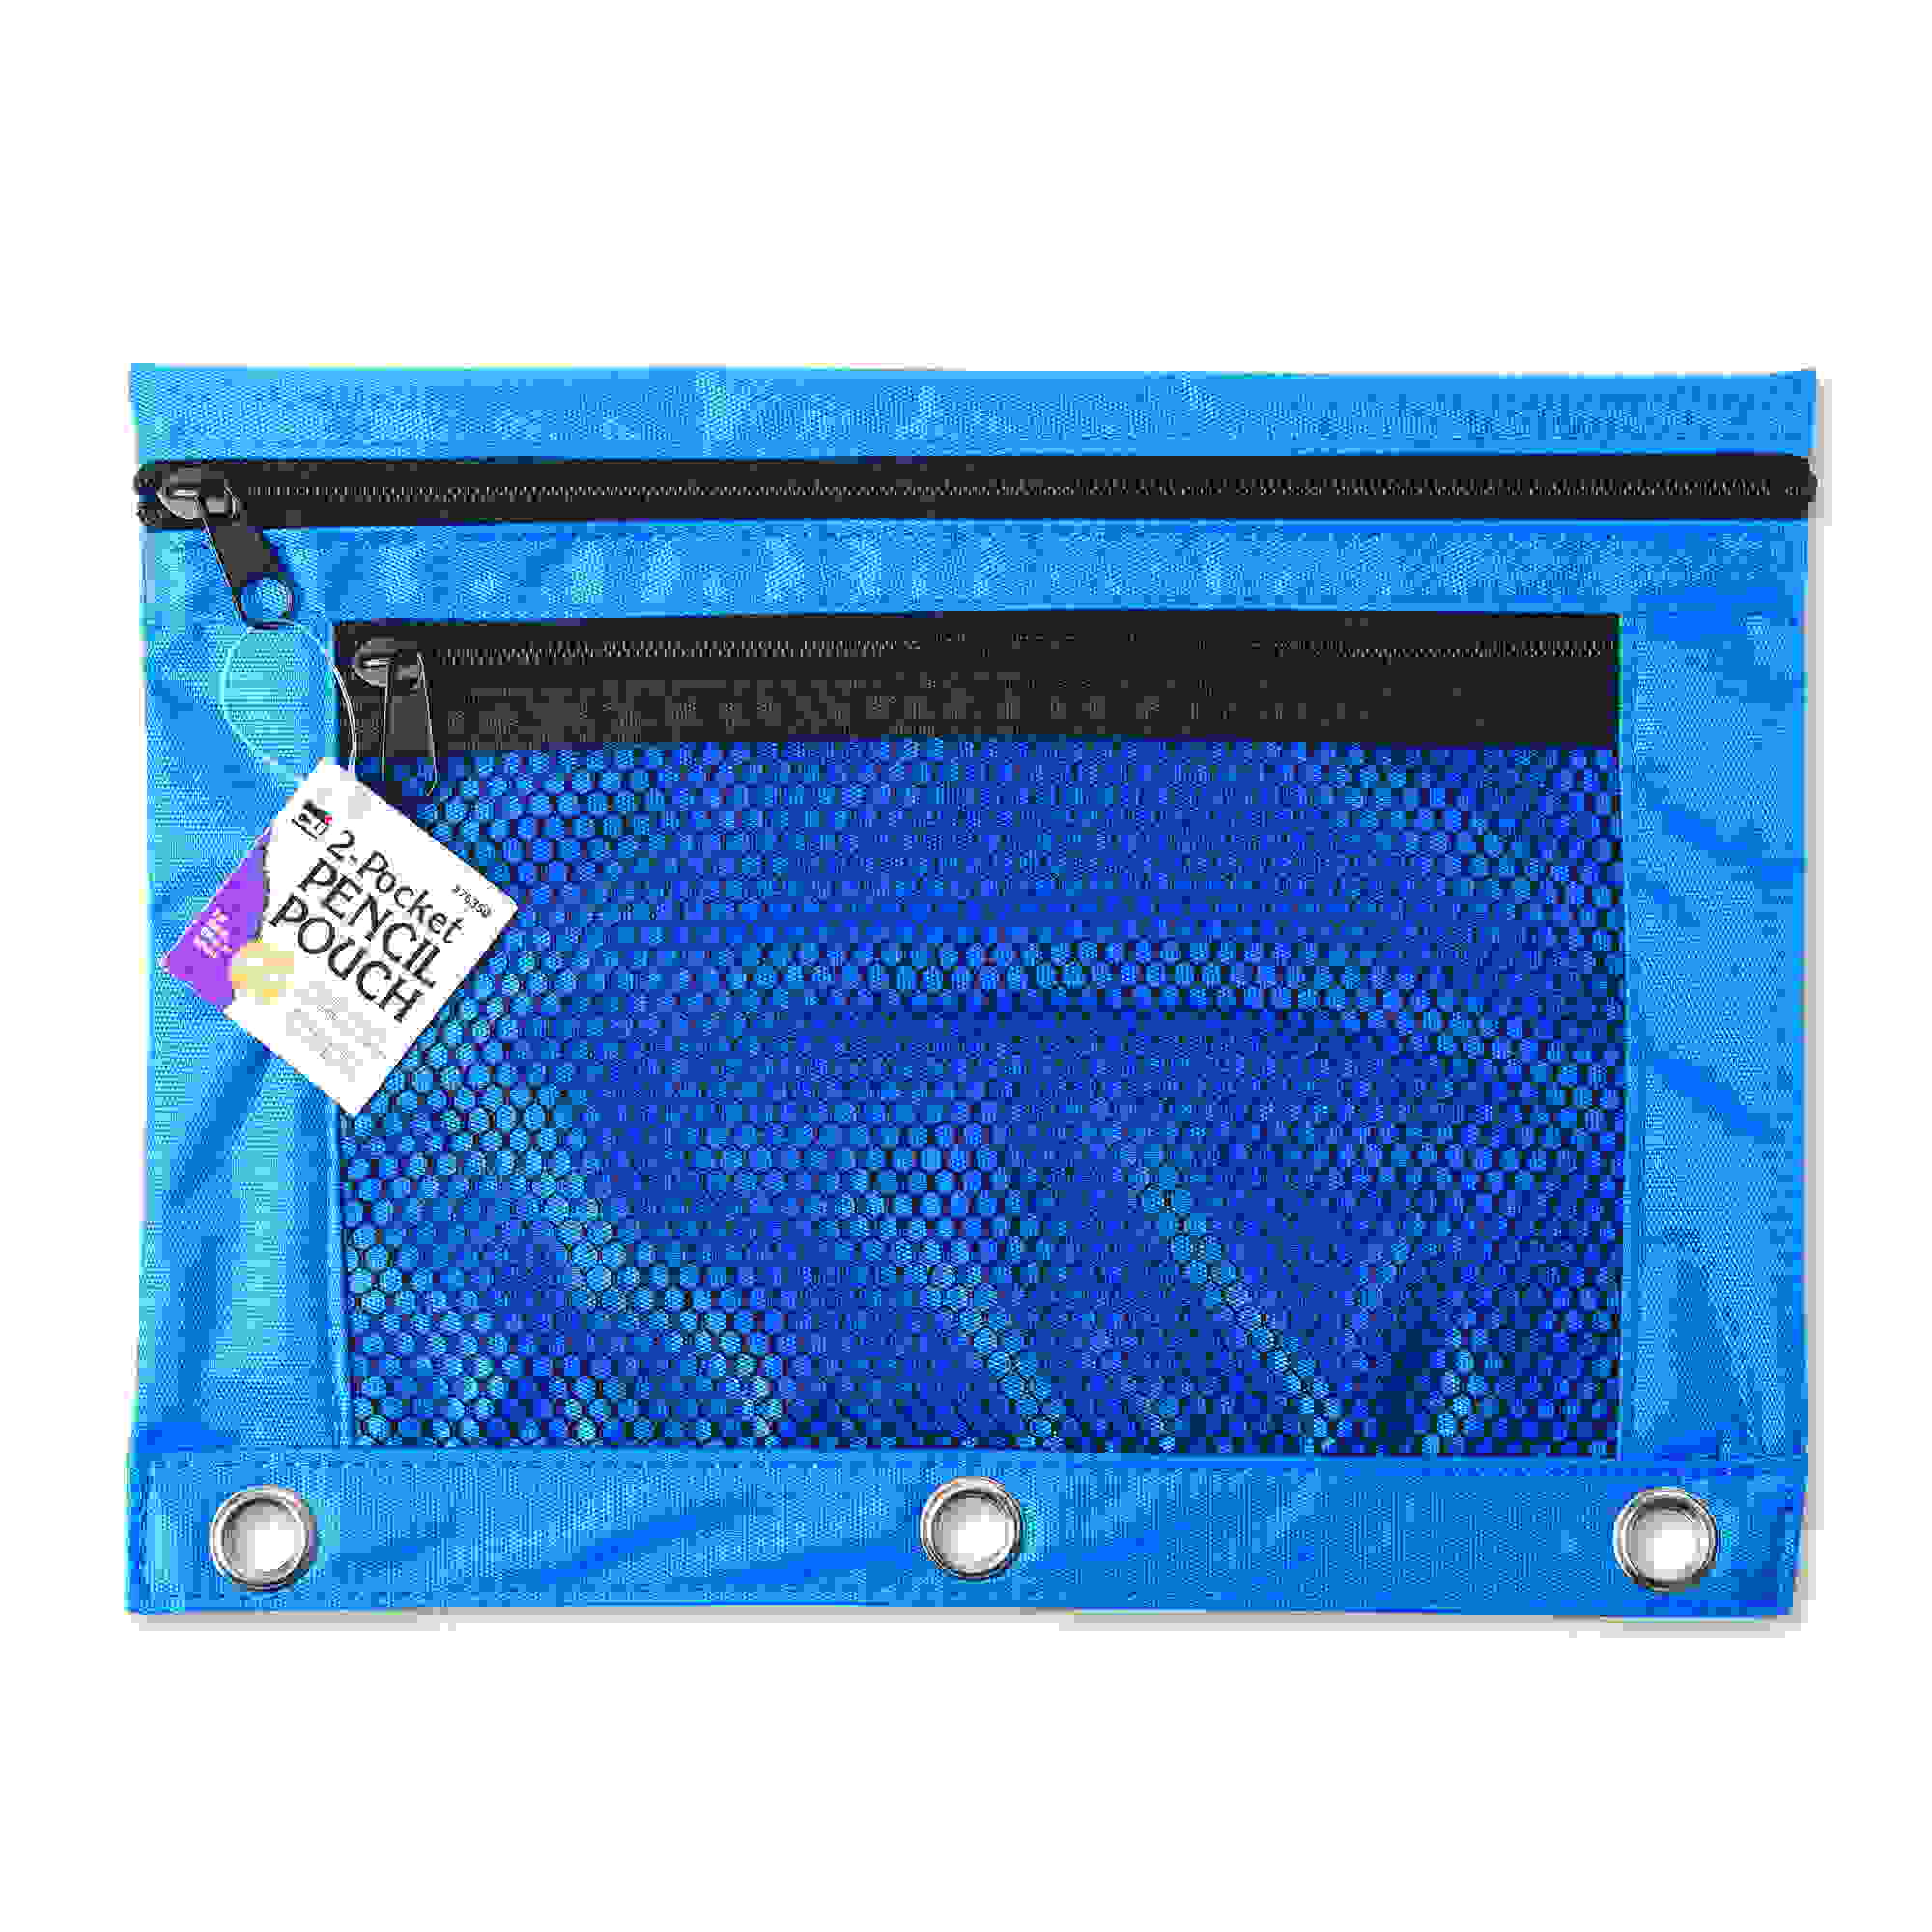 Pencil Pouch for Binder with 2 Pockets, Front Mesh Pocket, Assorted Colors